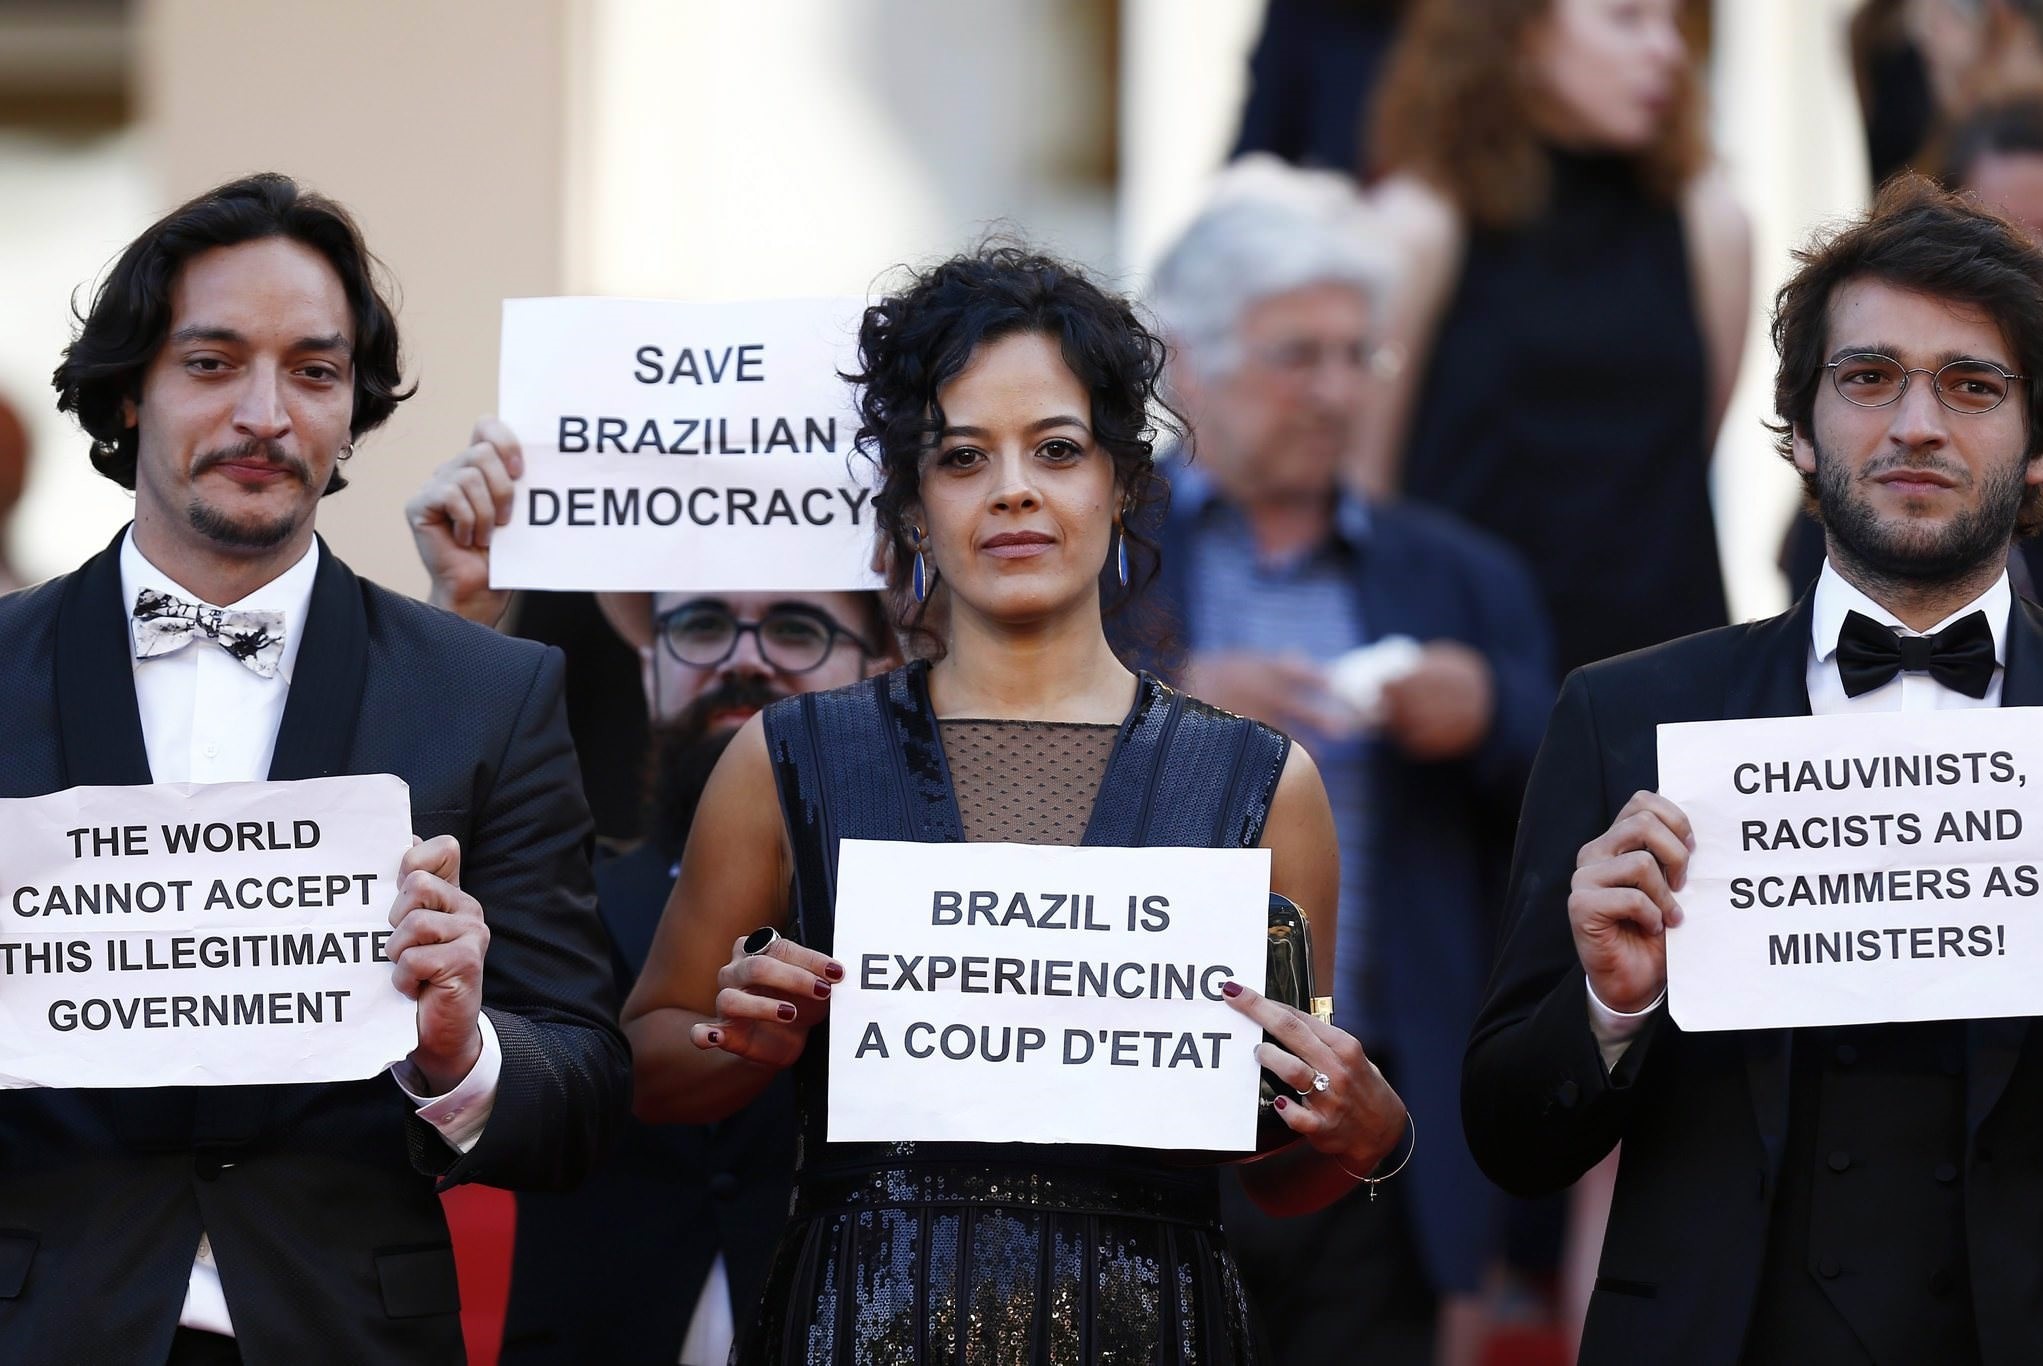 Brazilian actress Maeve Jinkings (C) holds a sign reading 'Brazil is experiencing a coup d'etat' as she leaves after the screening of 'Aquarius' during the 69th annual Cannes Film Festival, in Cannes, France, 17 May 2016. (EPA Photo)